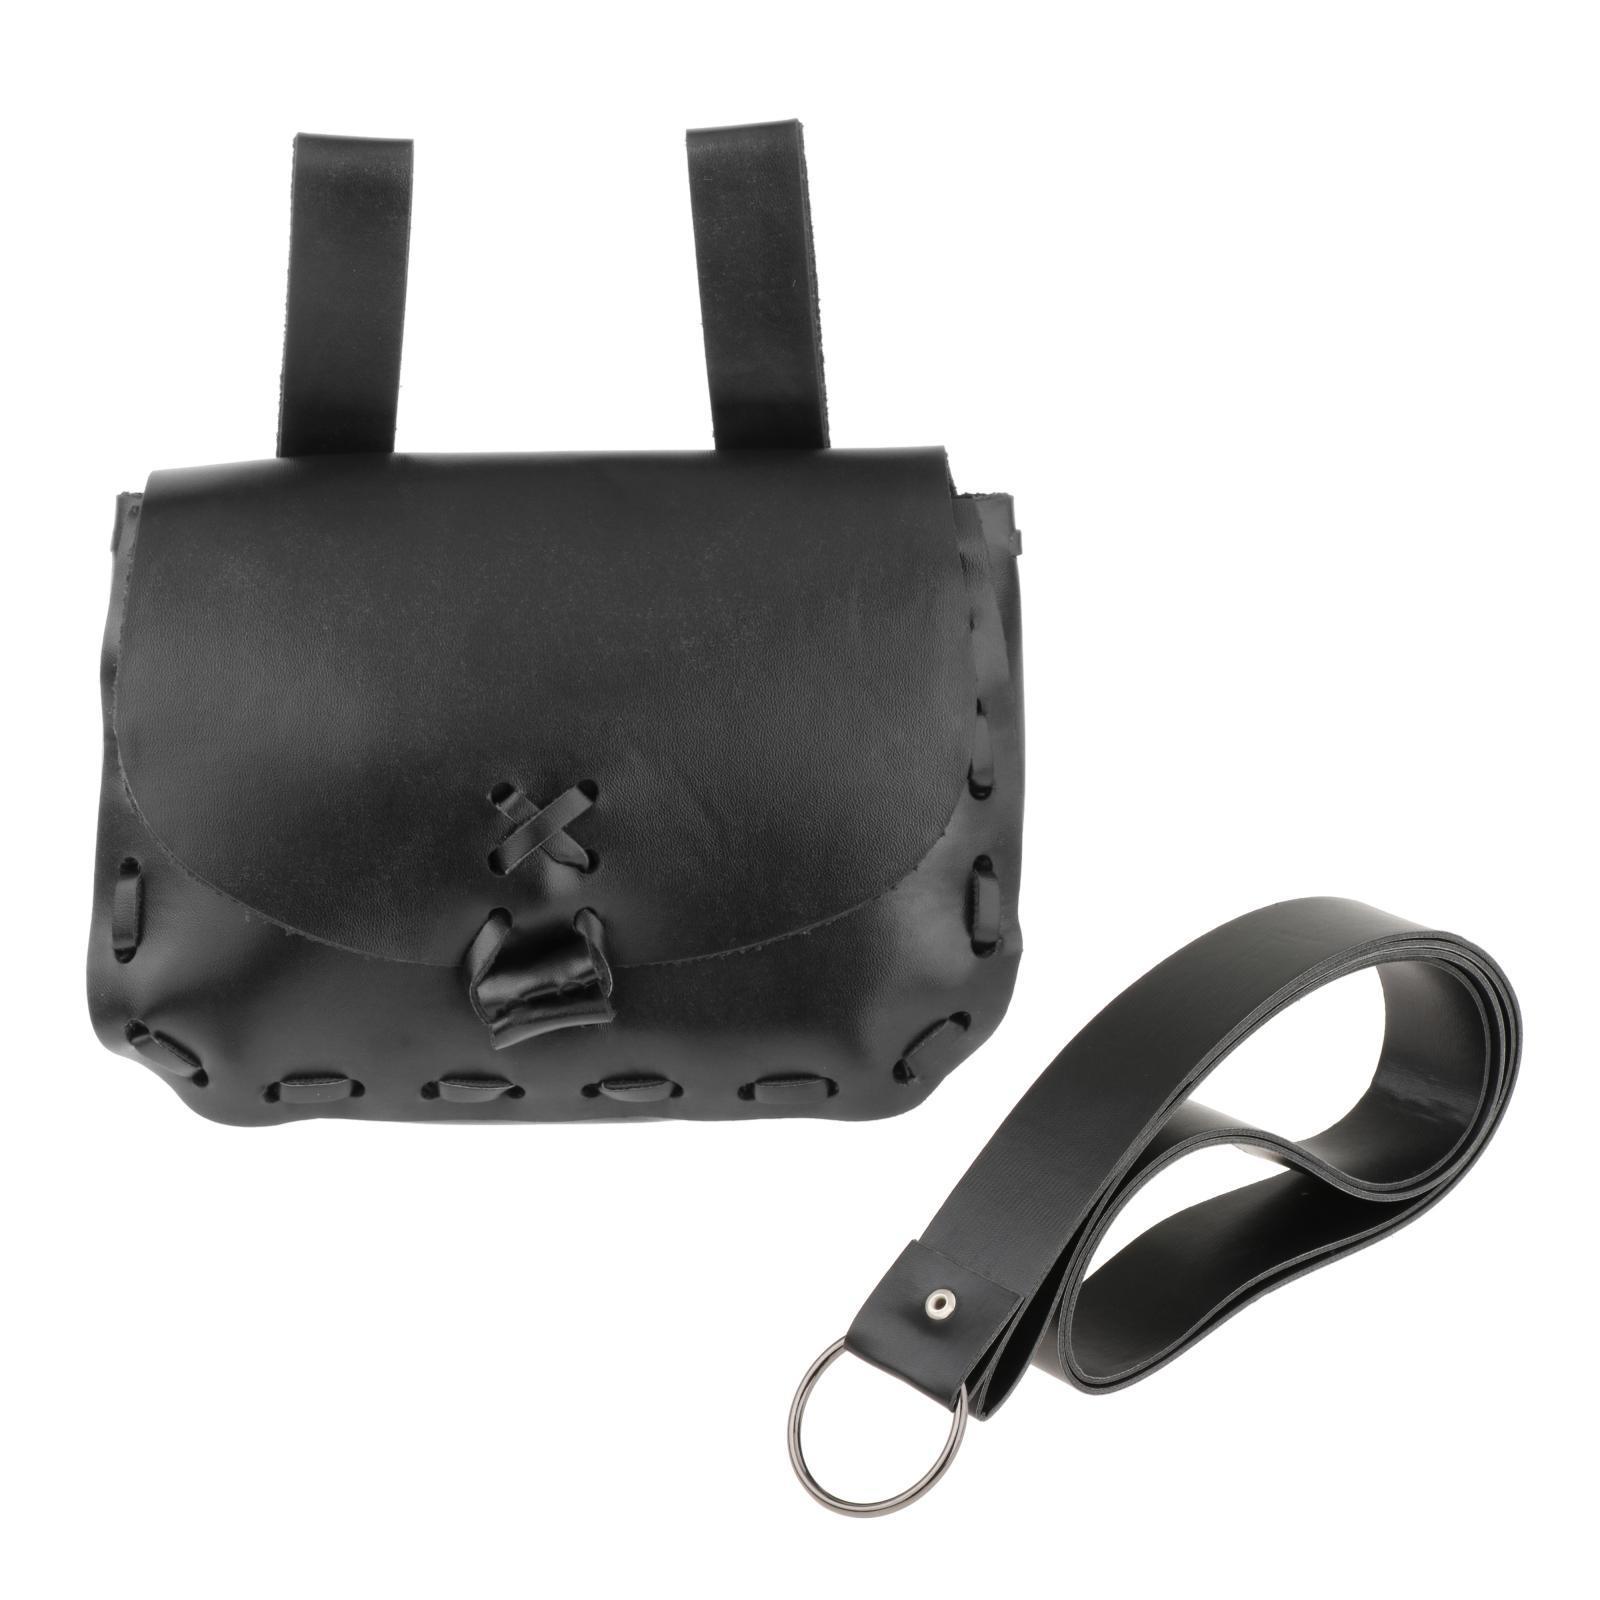 Retro PU Leather Waist Bag with Belt for  Cosplay Party Men Women